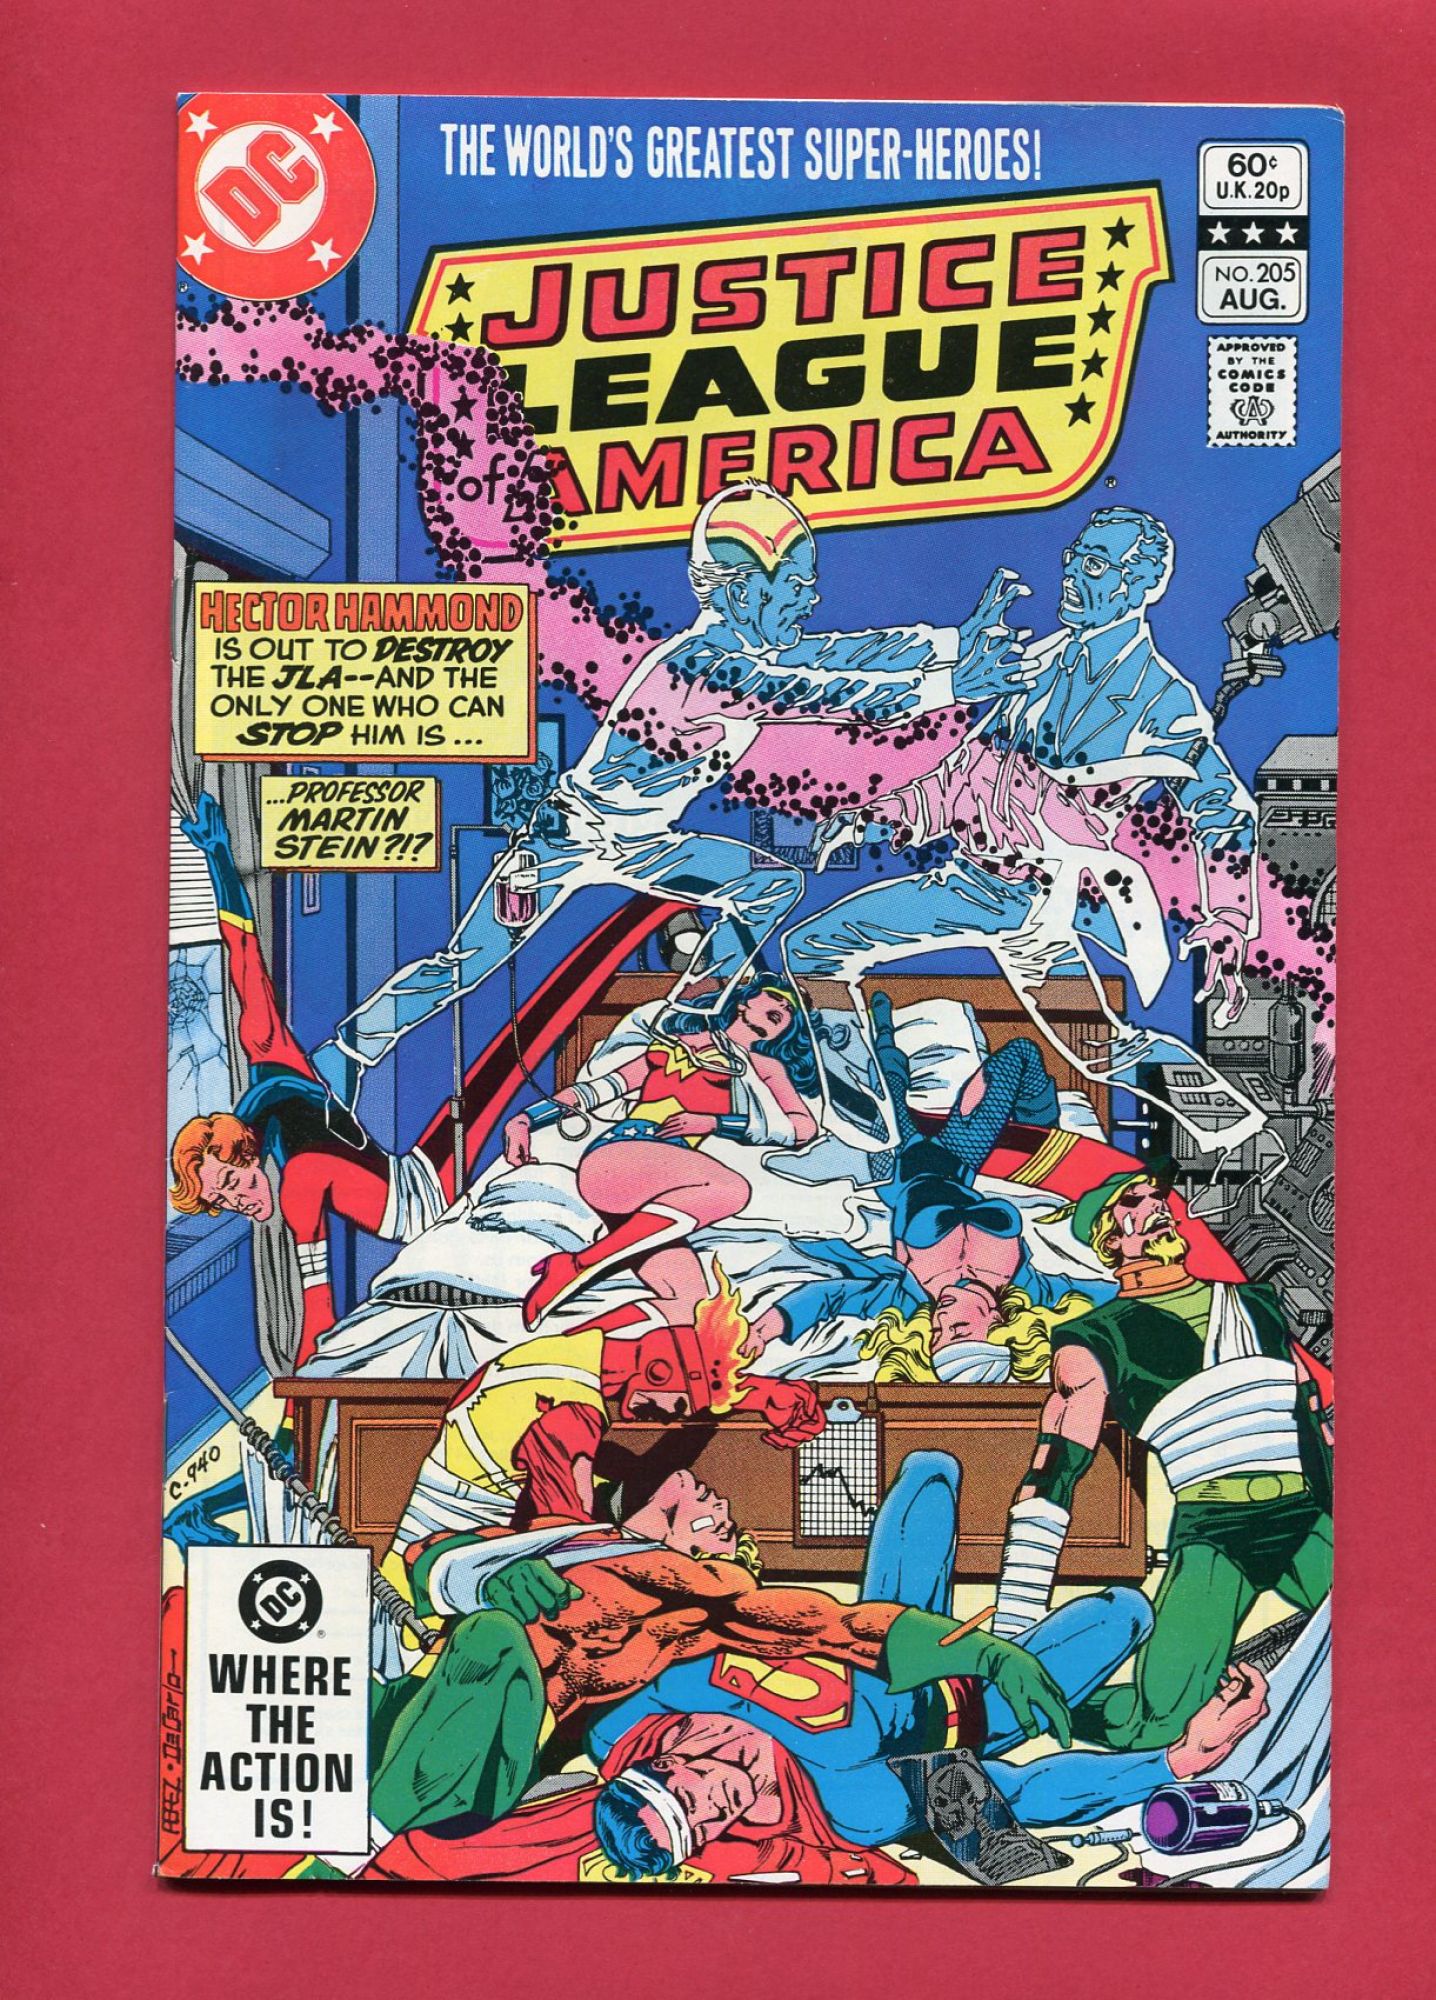 Justice League of America (Volume 1 1960) #205, Aug 1982, 8.5 VF+